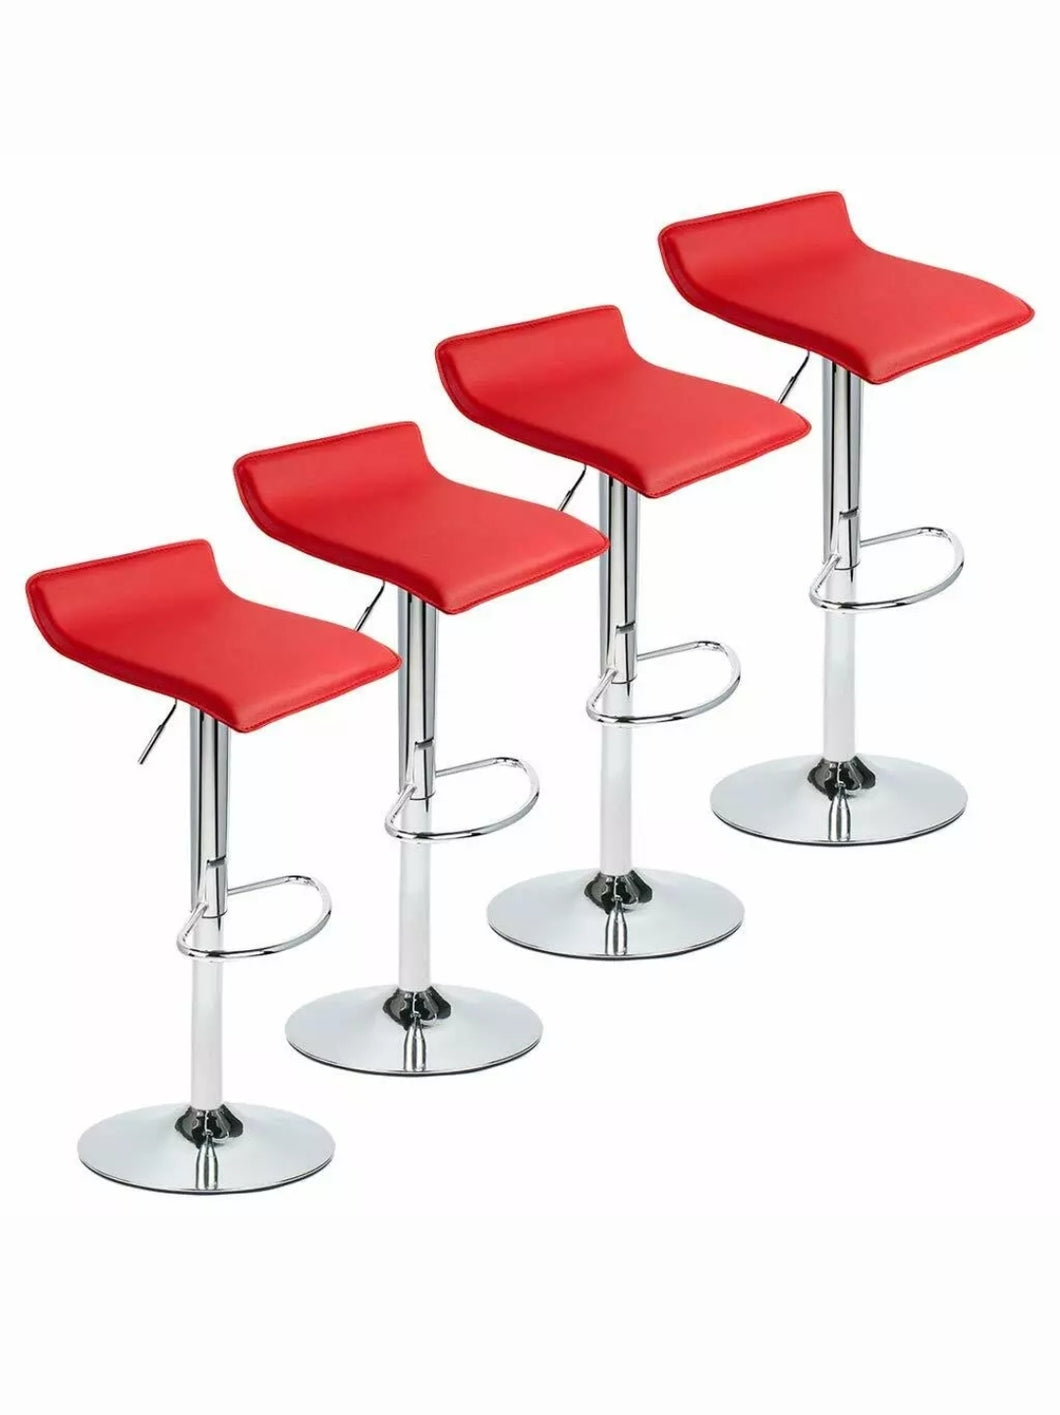 Red/ White/ Black/Set of 4 Bar Stools PU Leather Adjustable Swivel Pub Chair Kitchen Dining Red